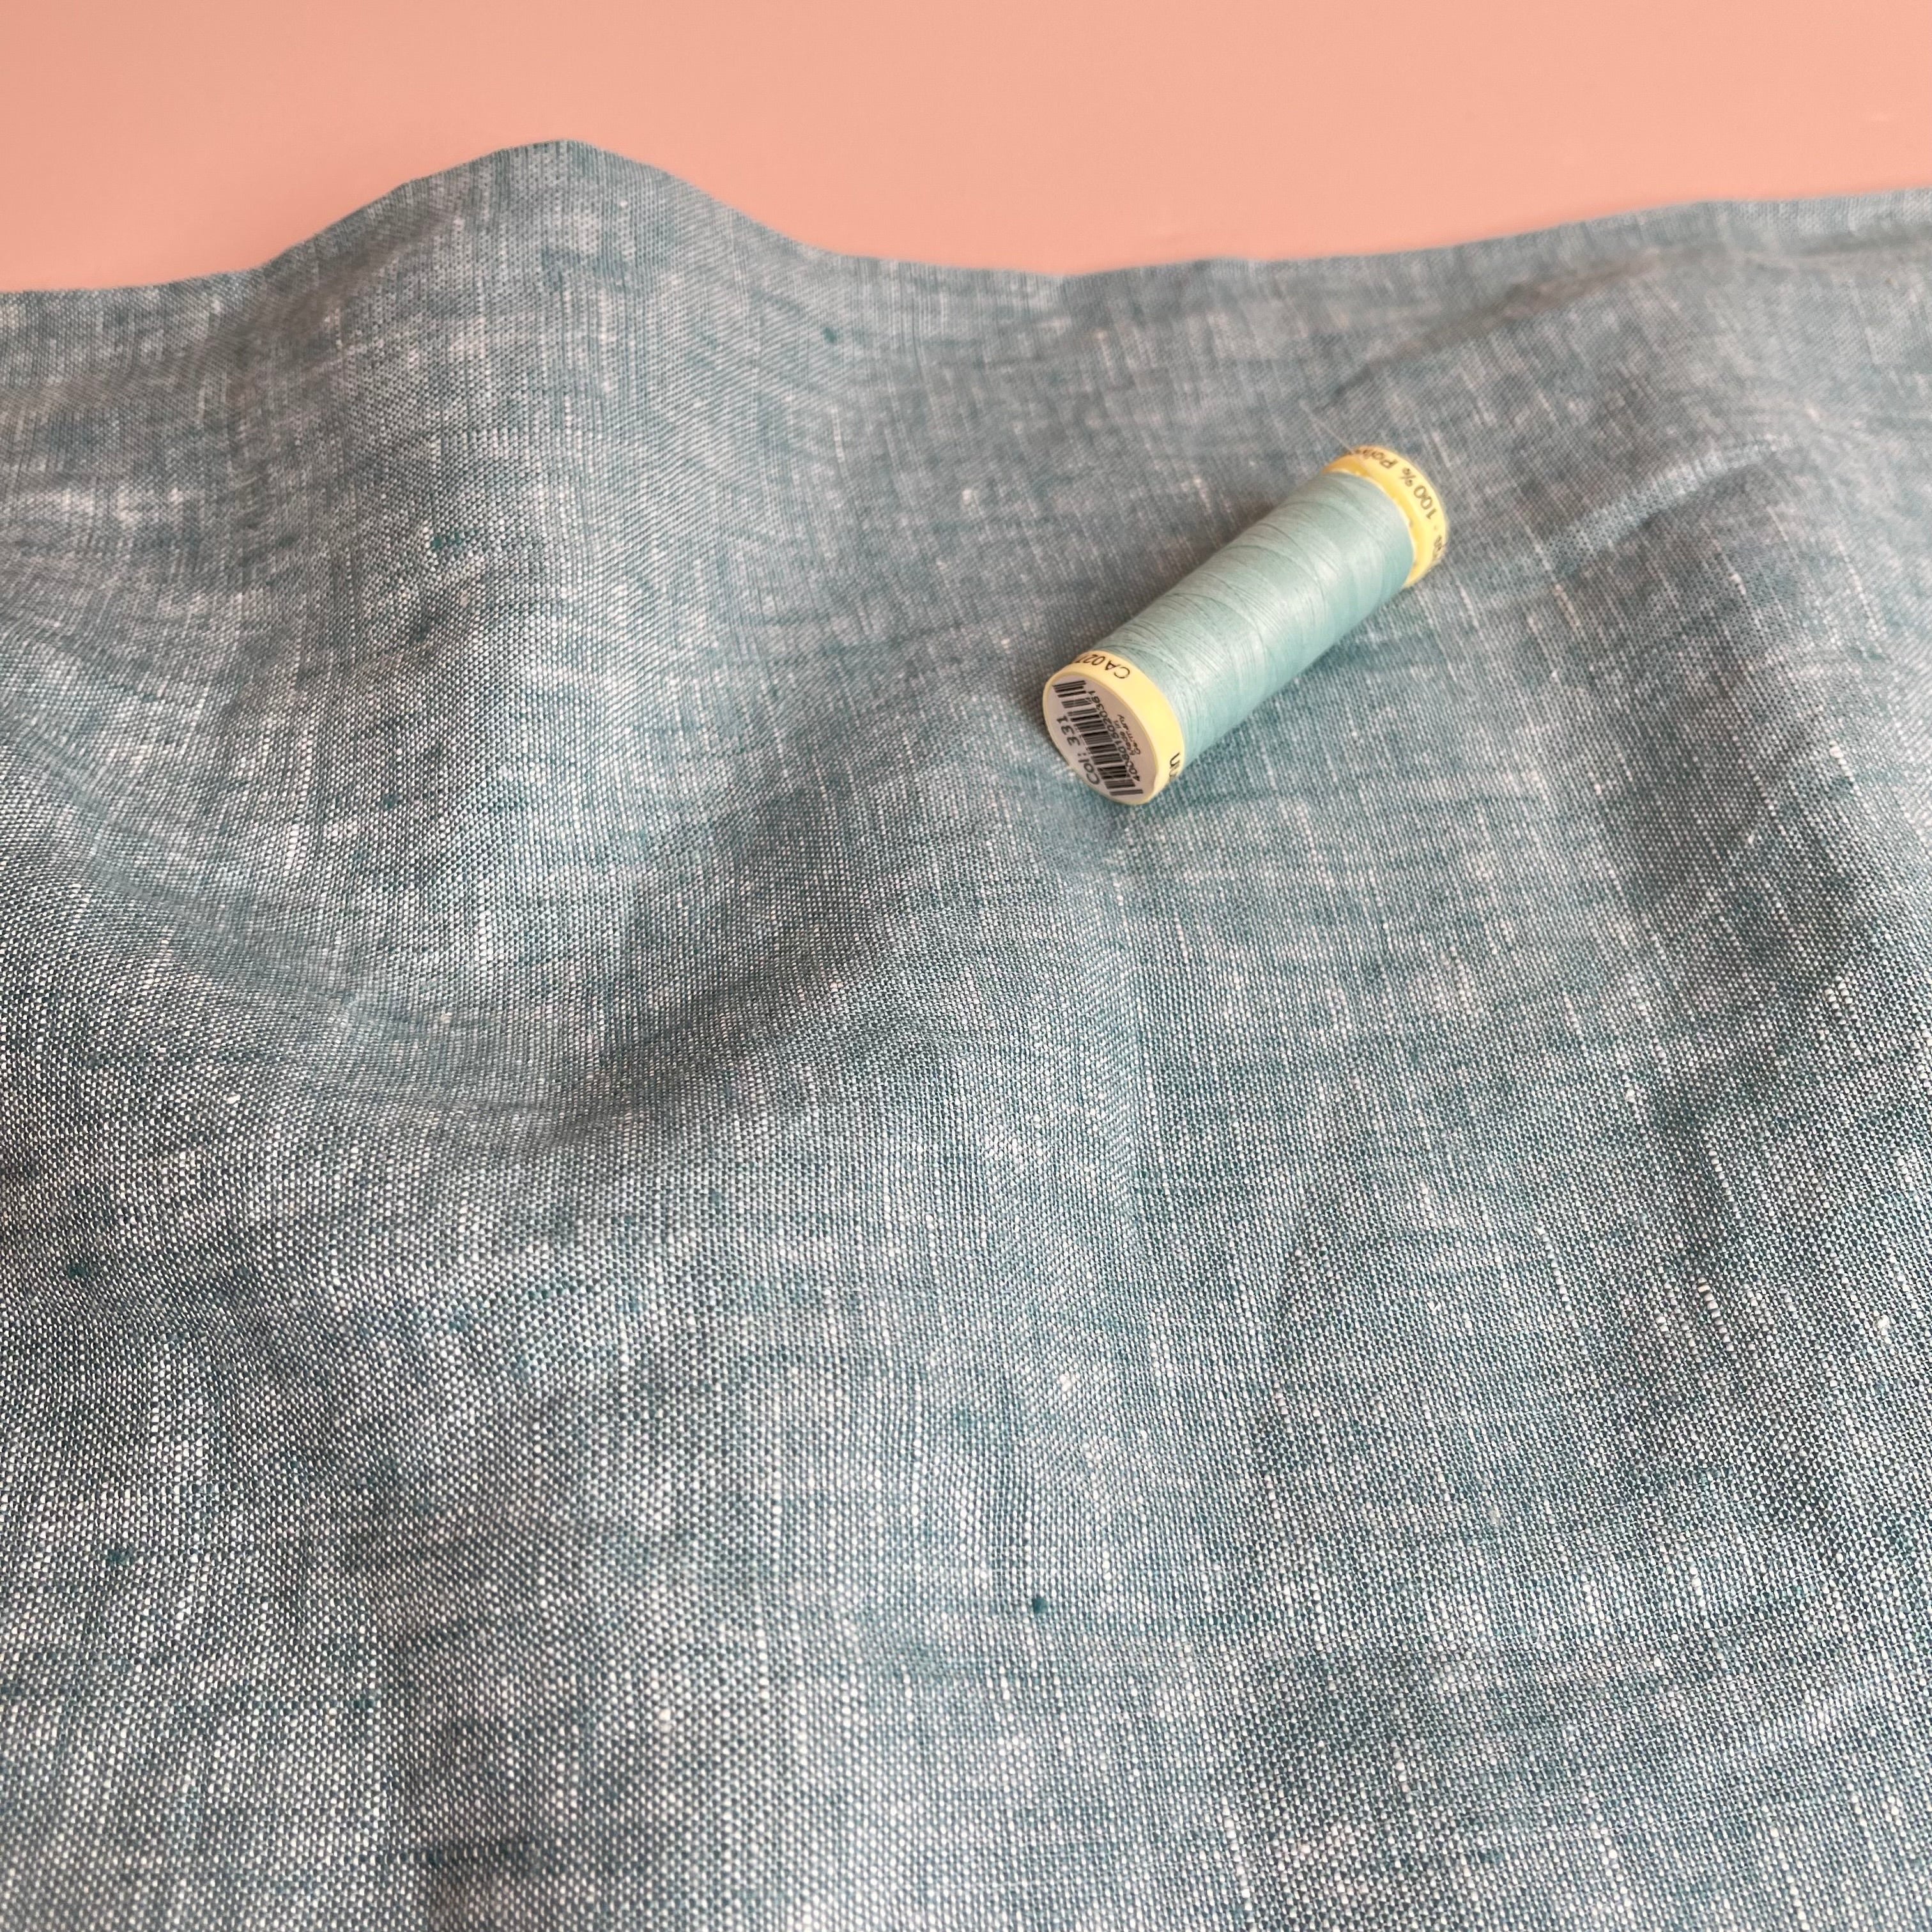 REMNANT 1.52 Metres - Yarn Dyed Pure Linen Fabric in Mineral Blue